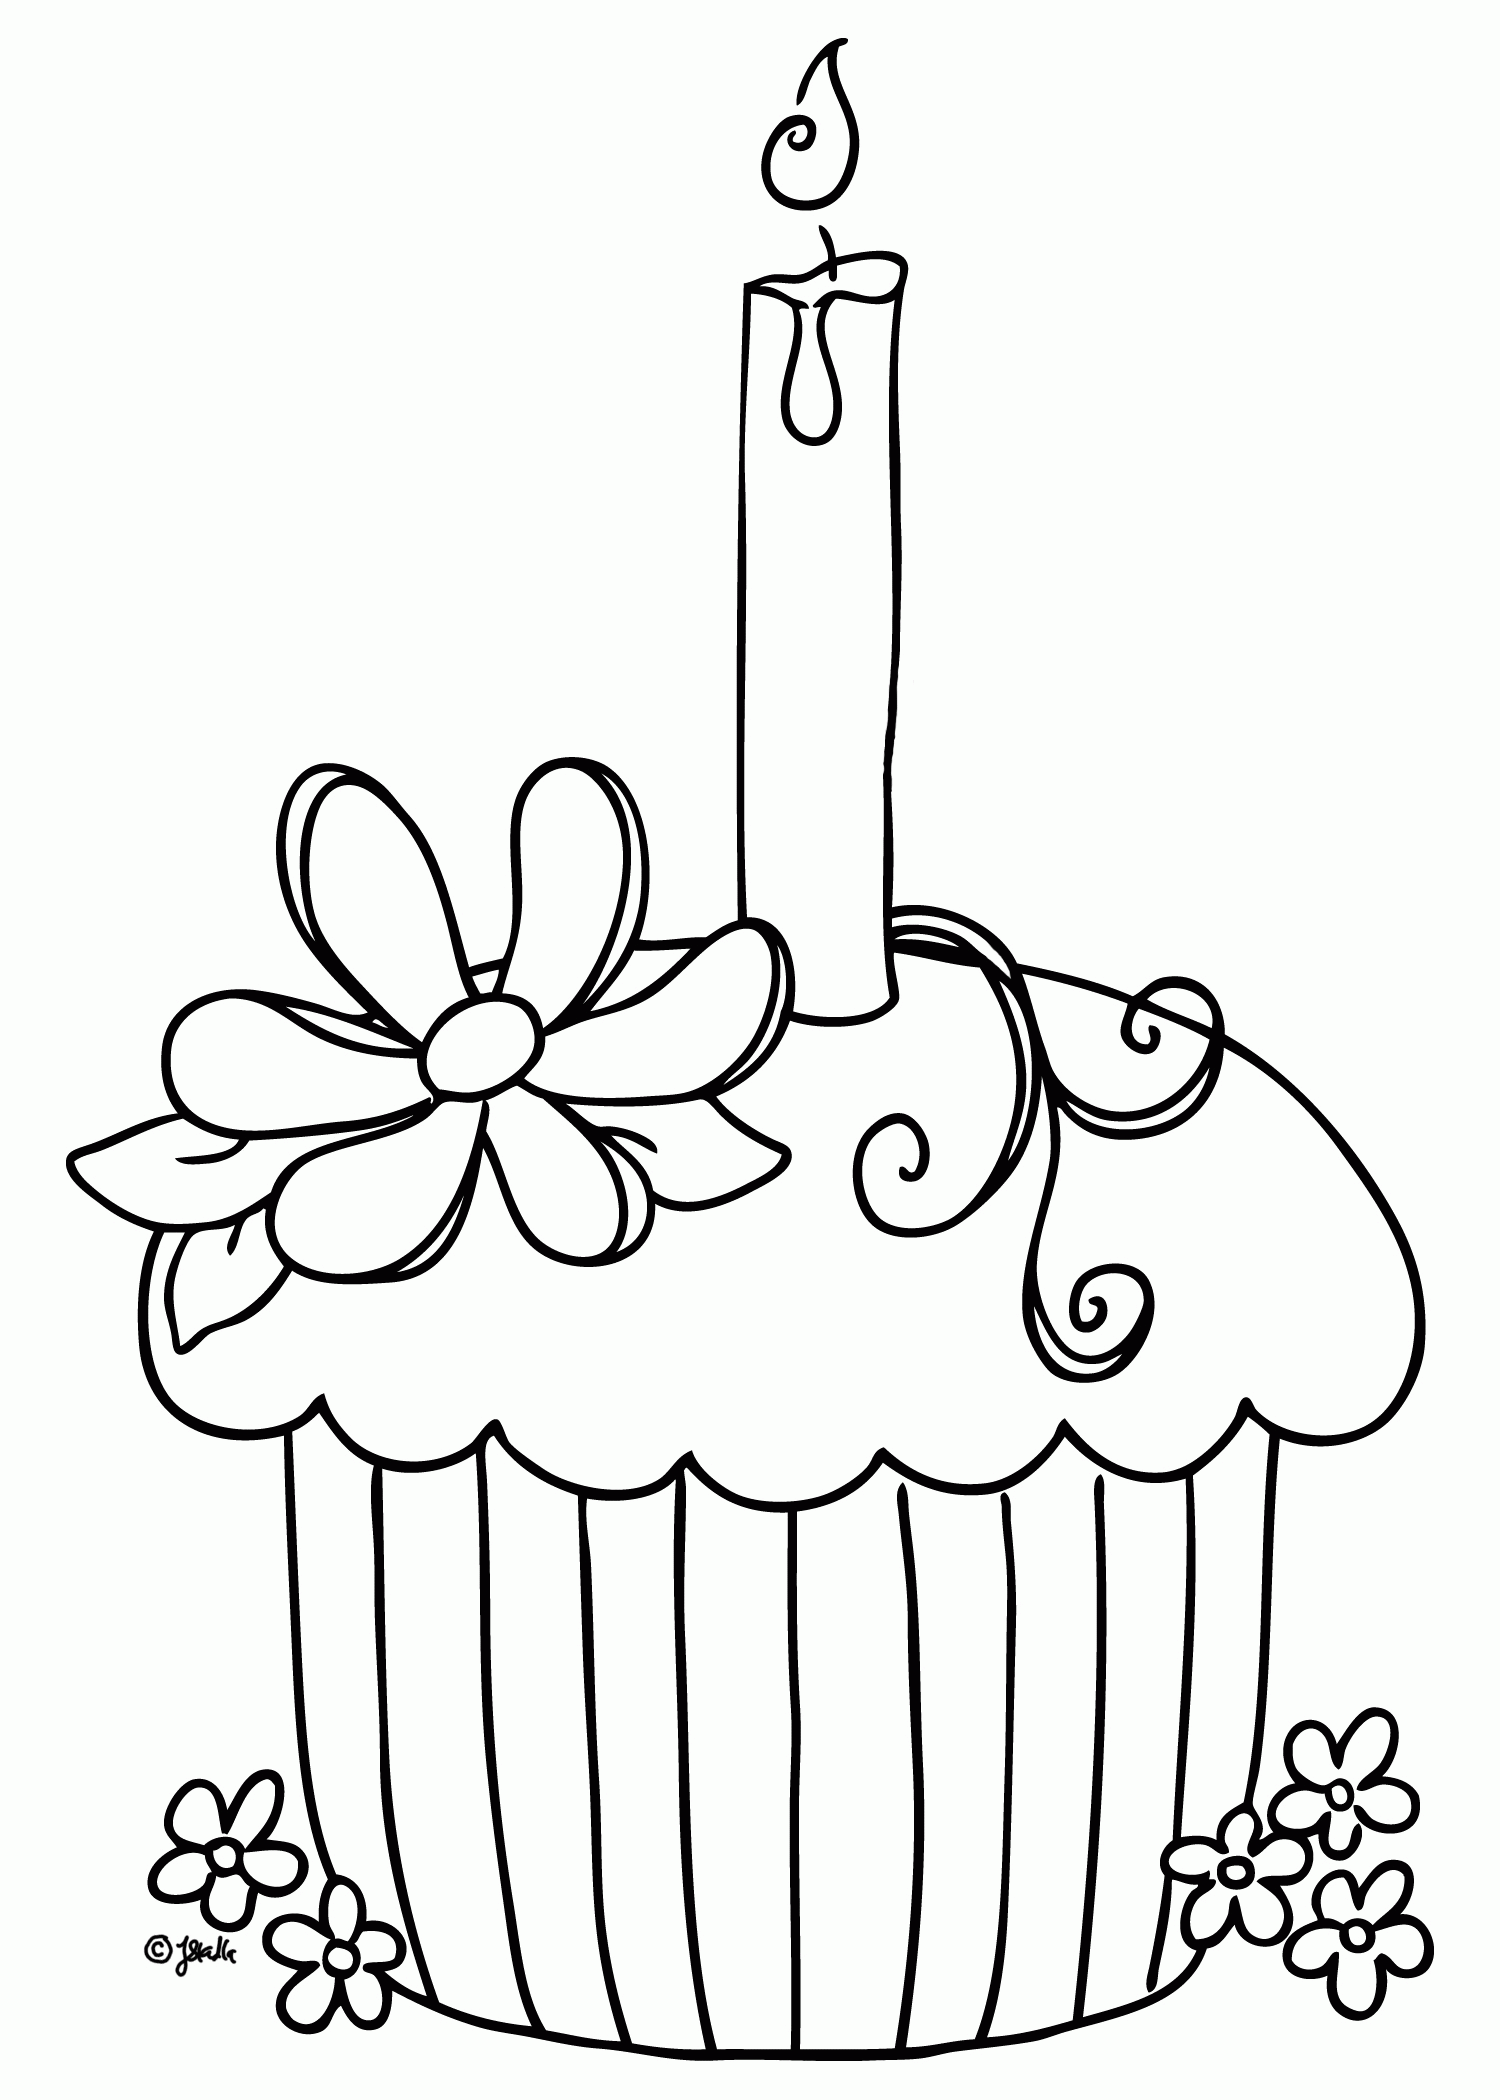 Cool Cup Cake 8 Coloring Page